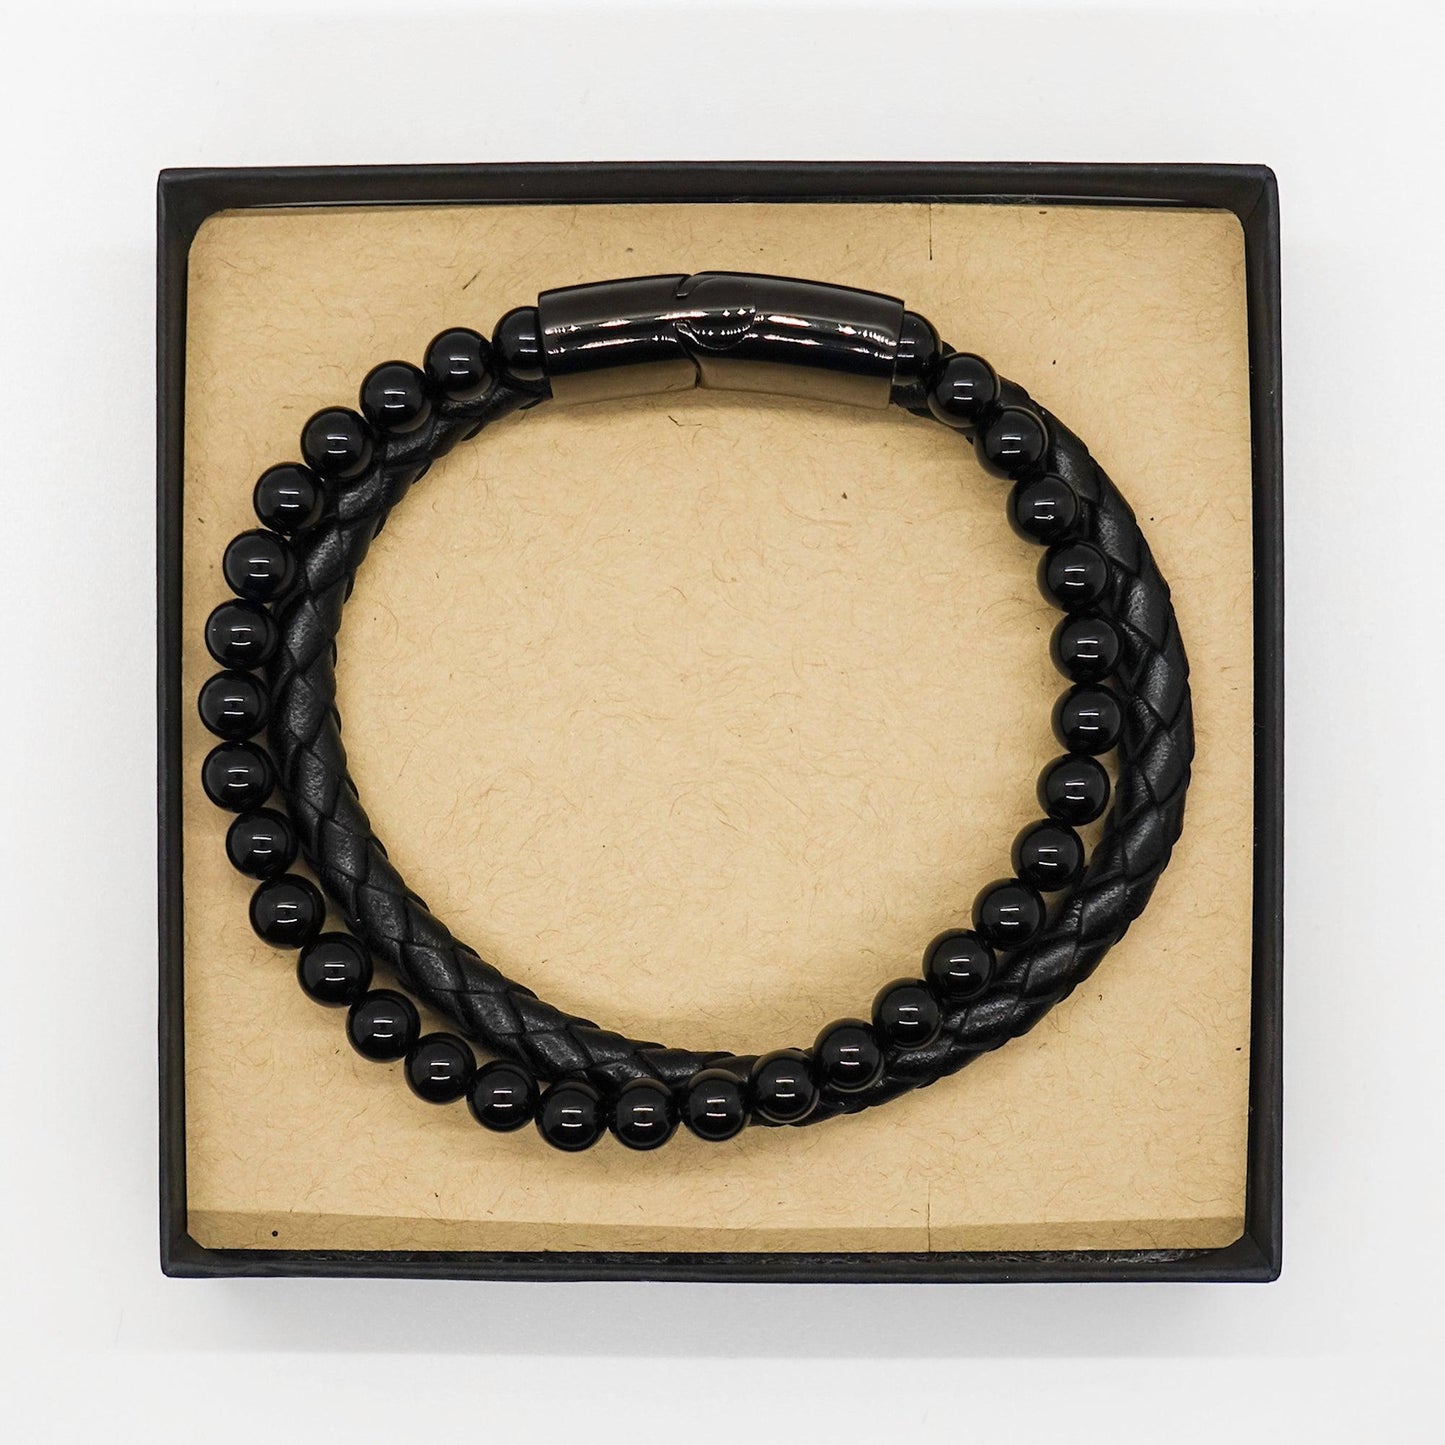 Executive Assistant Black Braided Leather Stone Bracelet - Thanks for being who you are - Birthday Christmas Jewelry Gifts Coworkers Colleague Boss - Mallard Moon Gift Shop